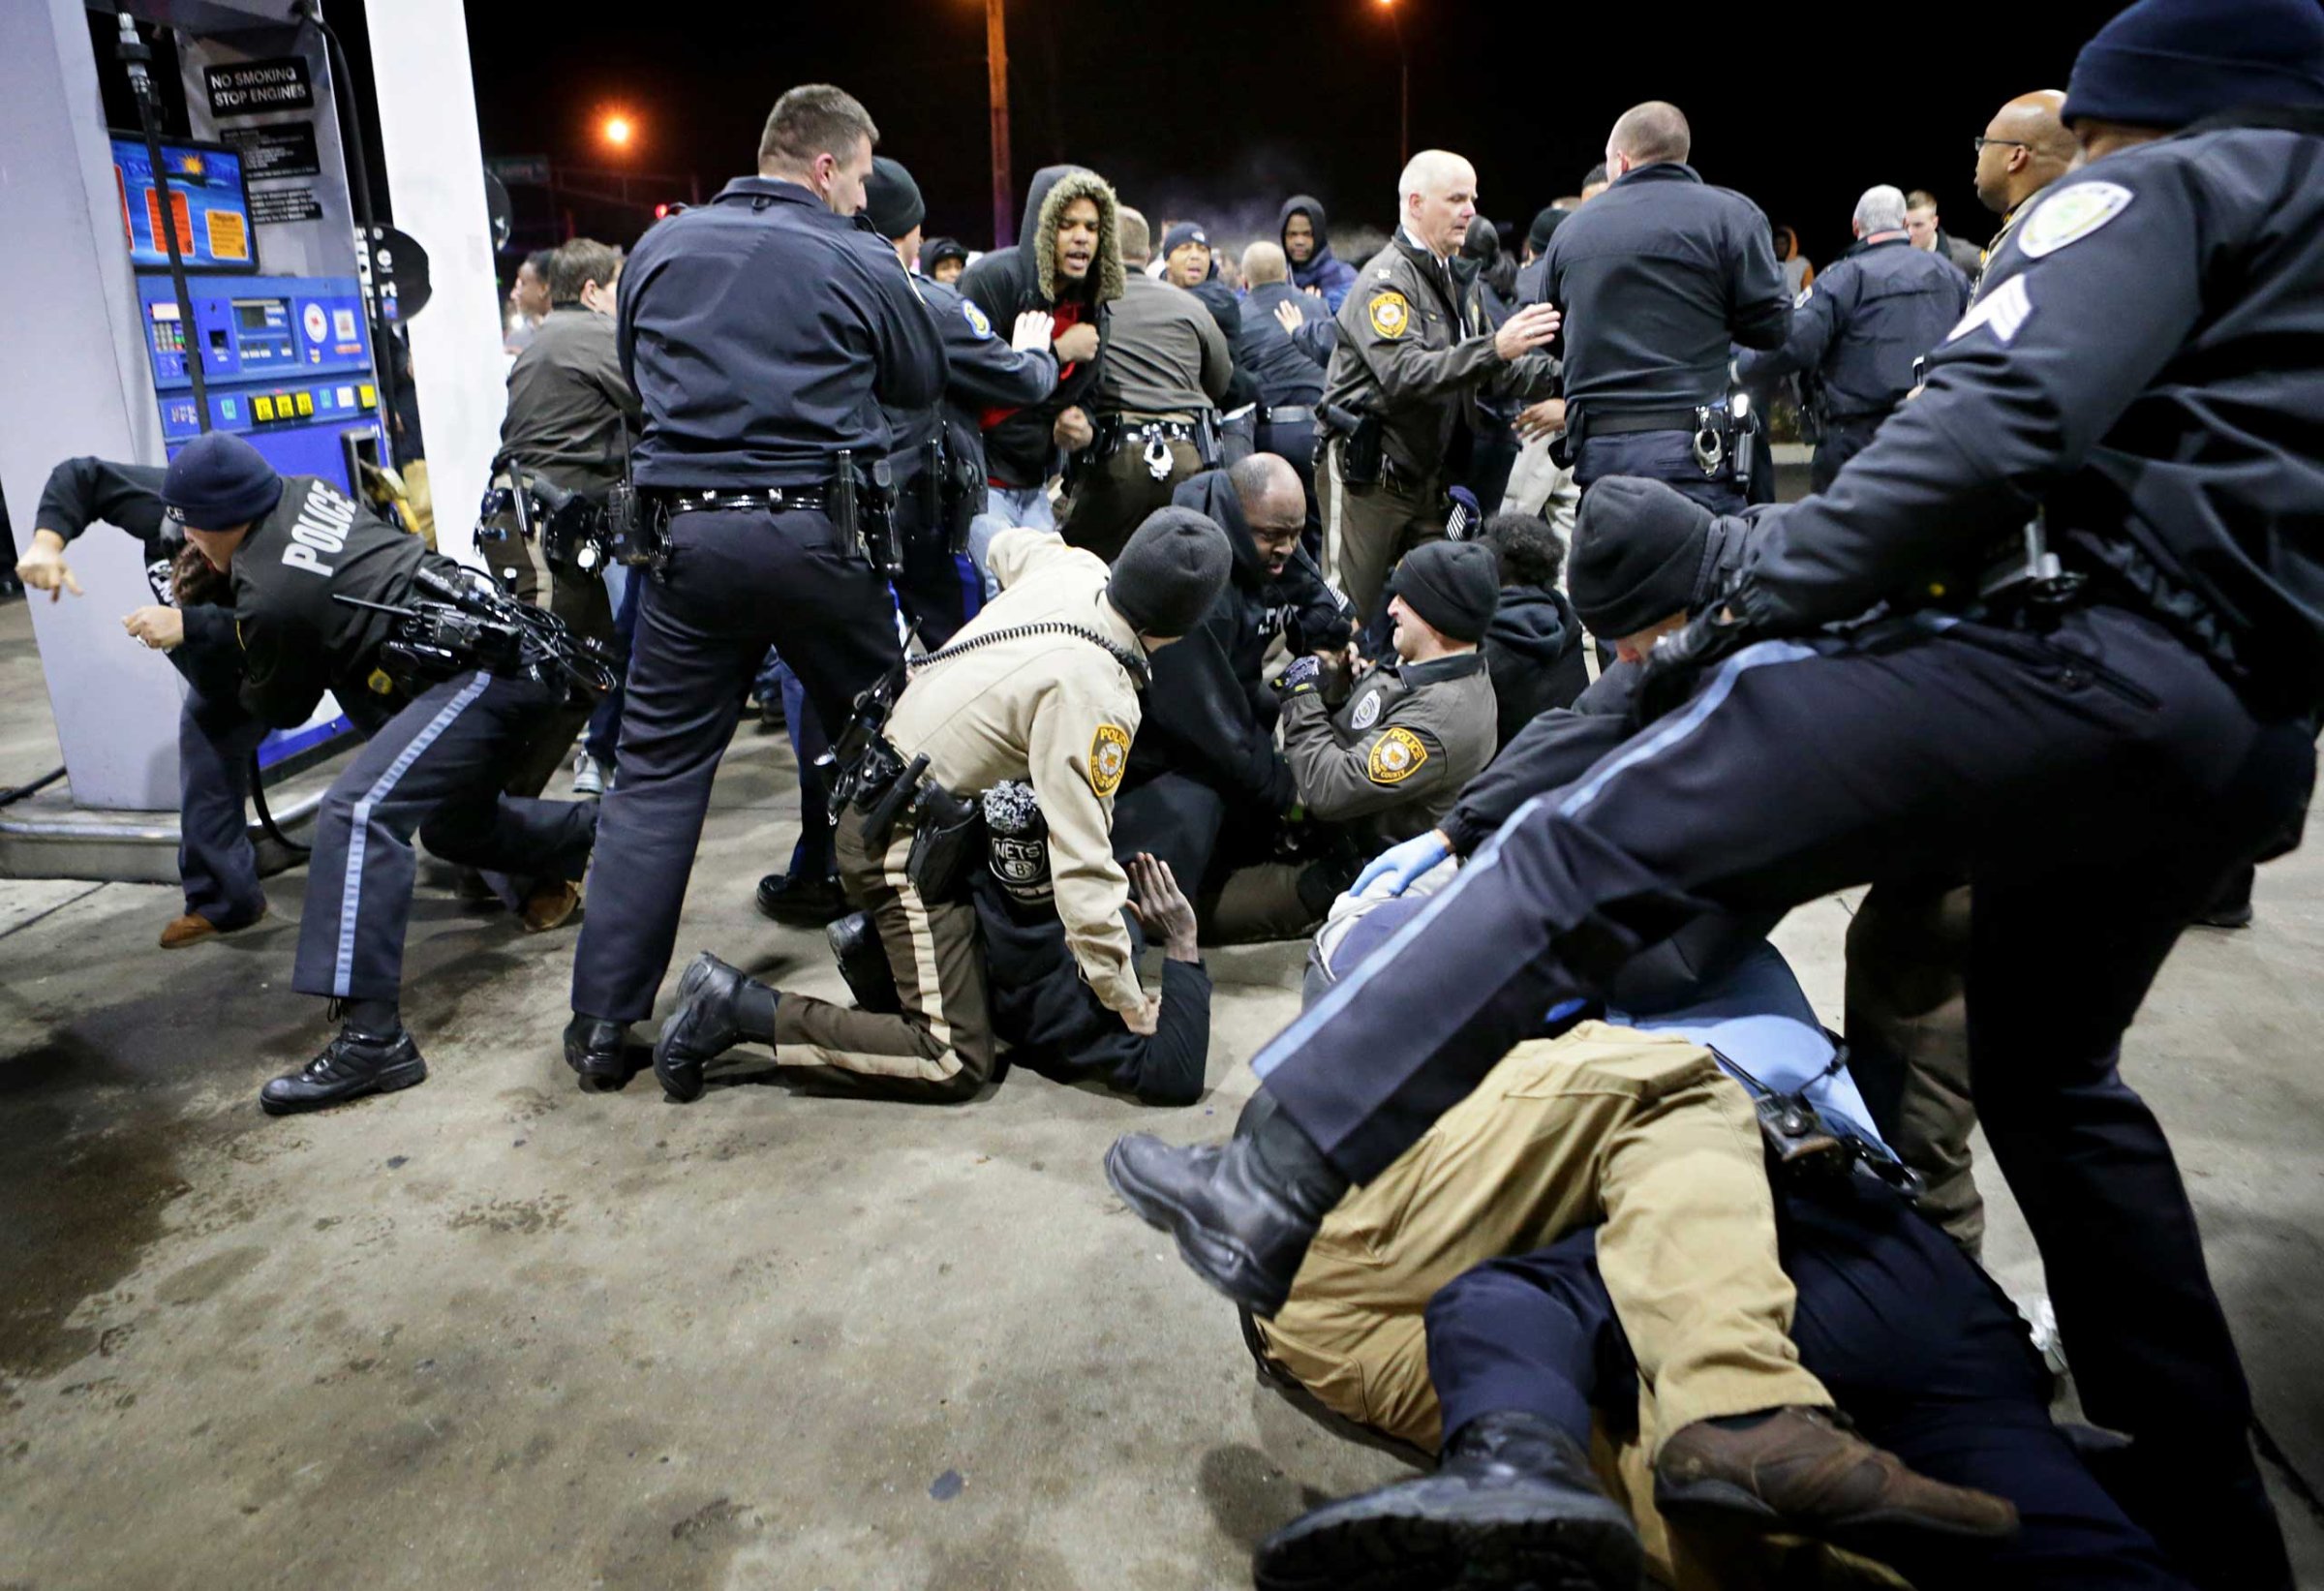 Police try to control a crowd on Dec. 24, 2014, on the lot of a gas station following a shooting Tuesday in Berkeley, Mo.